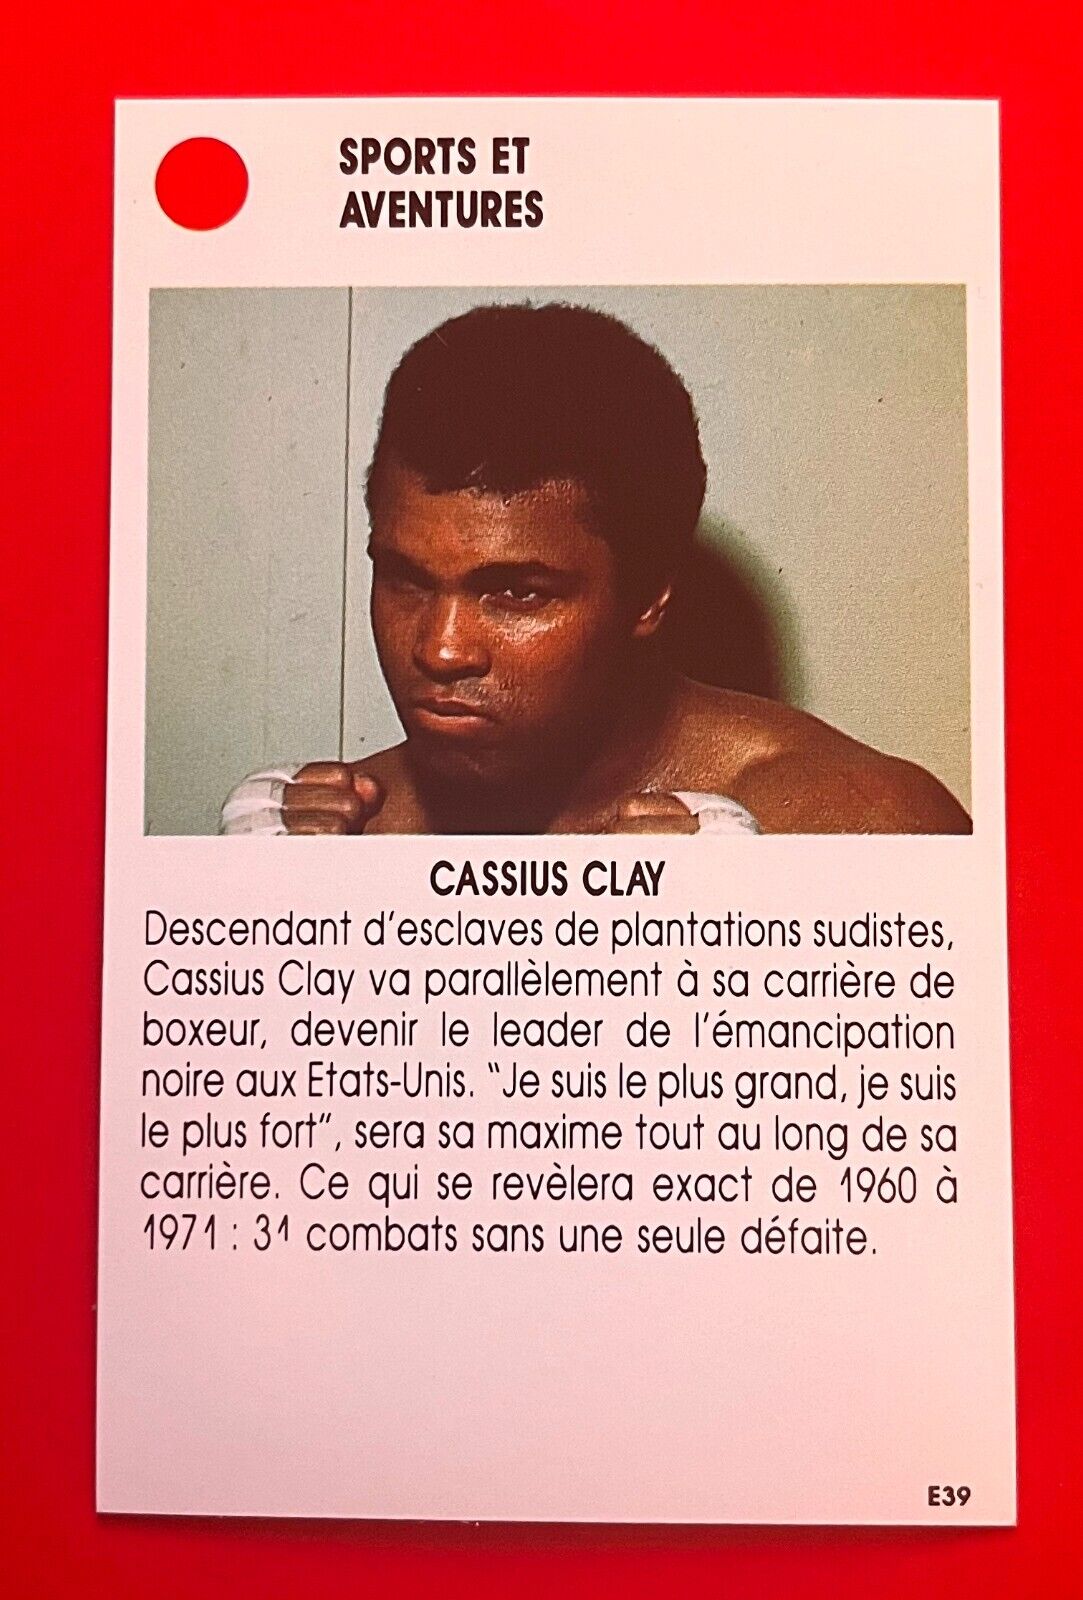 BOXING STAR CASSIUS CLAY / MUHAMMAD ALI VERY RARE ROOKIE CARD FRENCH EDITION 1987